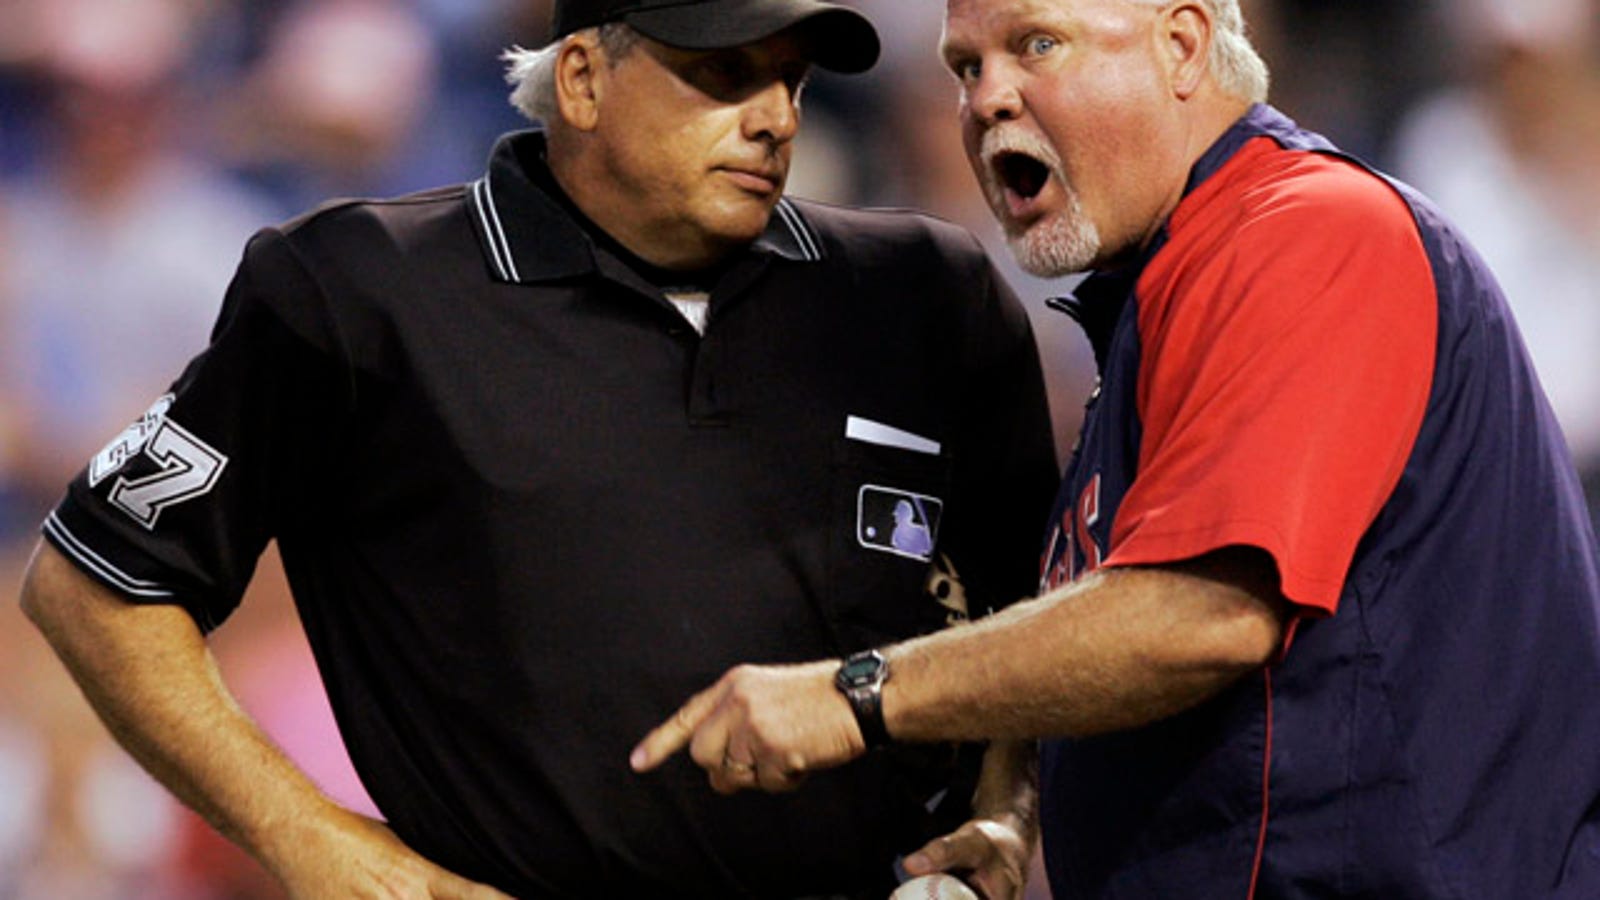 Better Know An Umpire: Larry Vanover